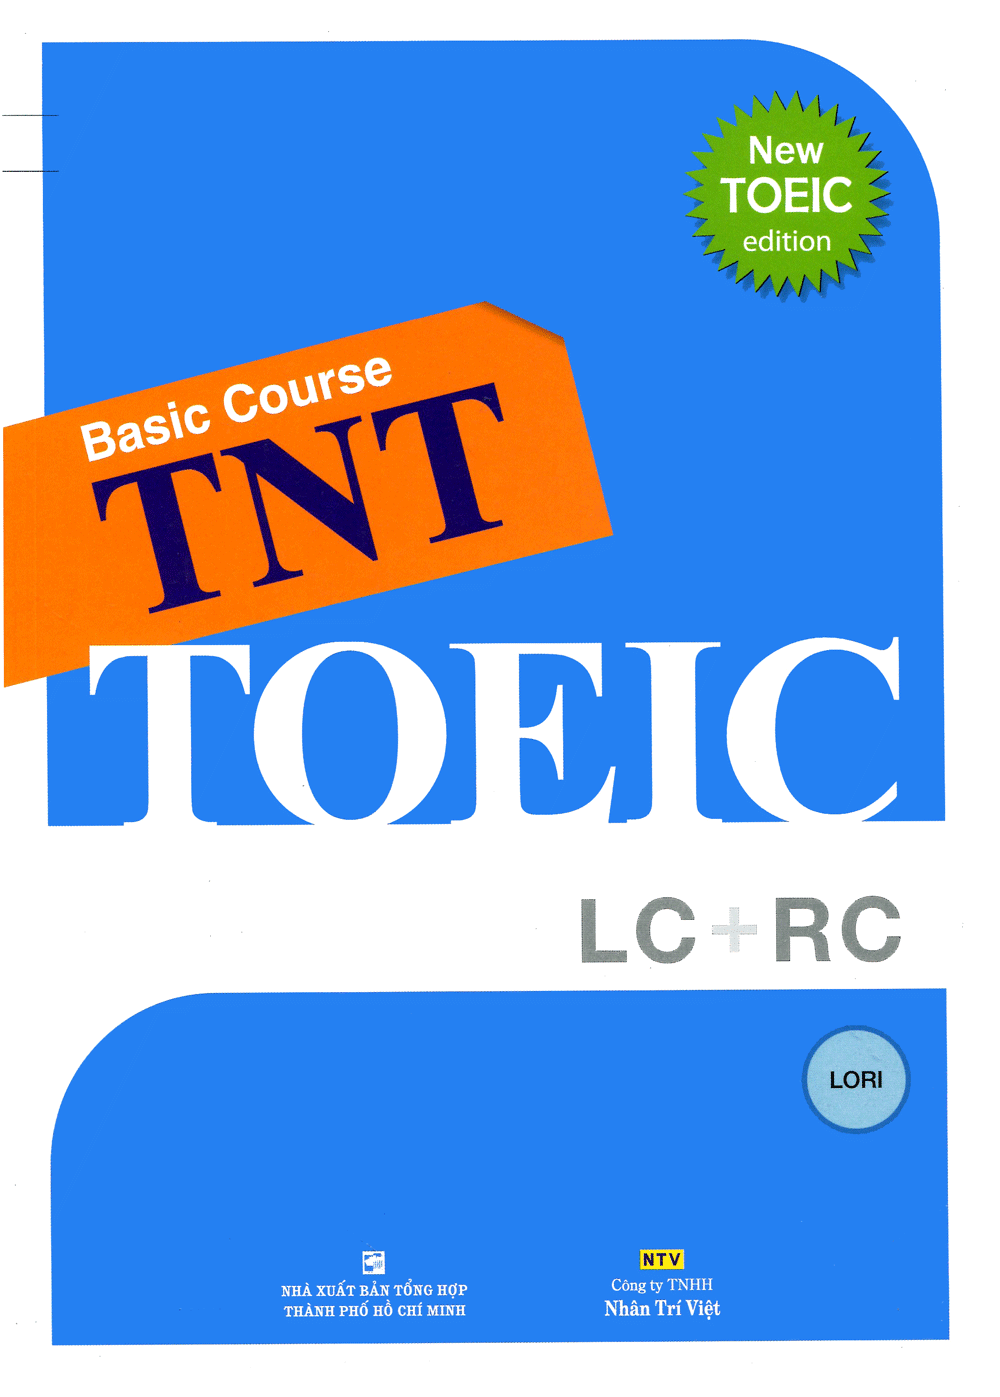 Basic Course TNT - TOEIC LC + RC